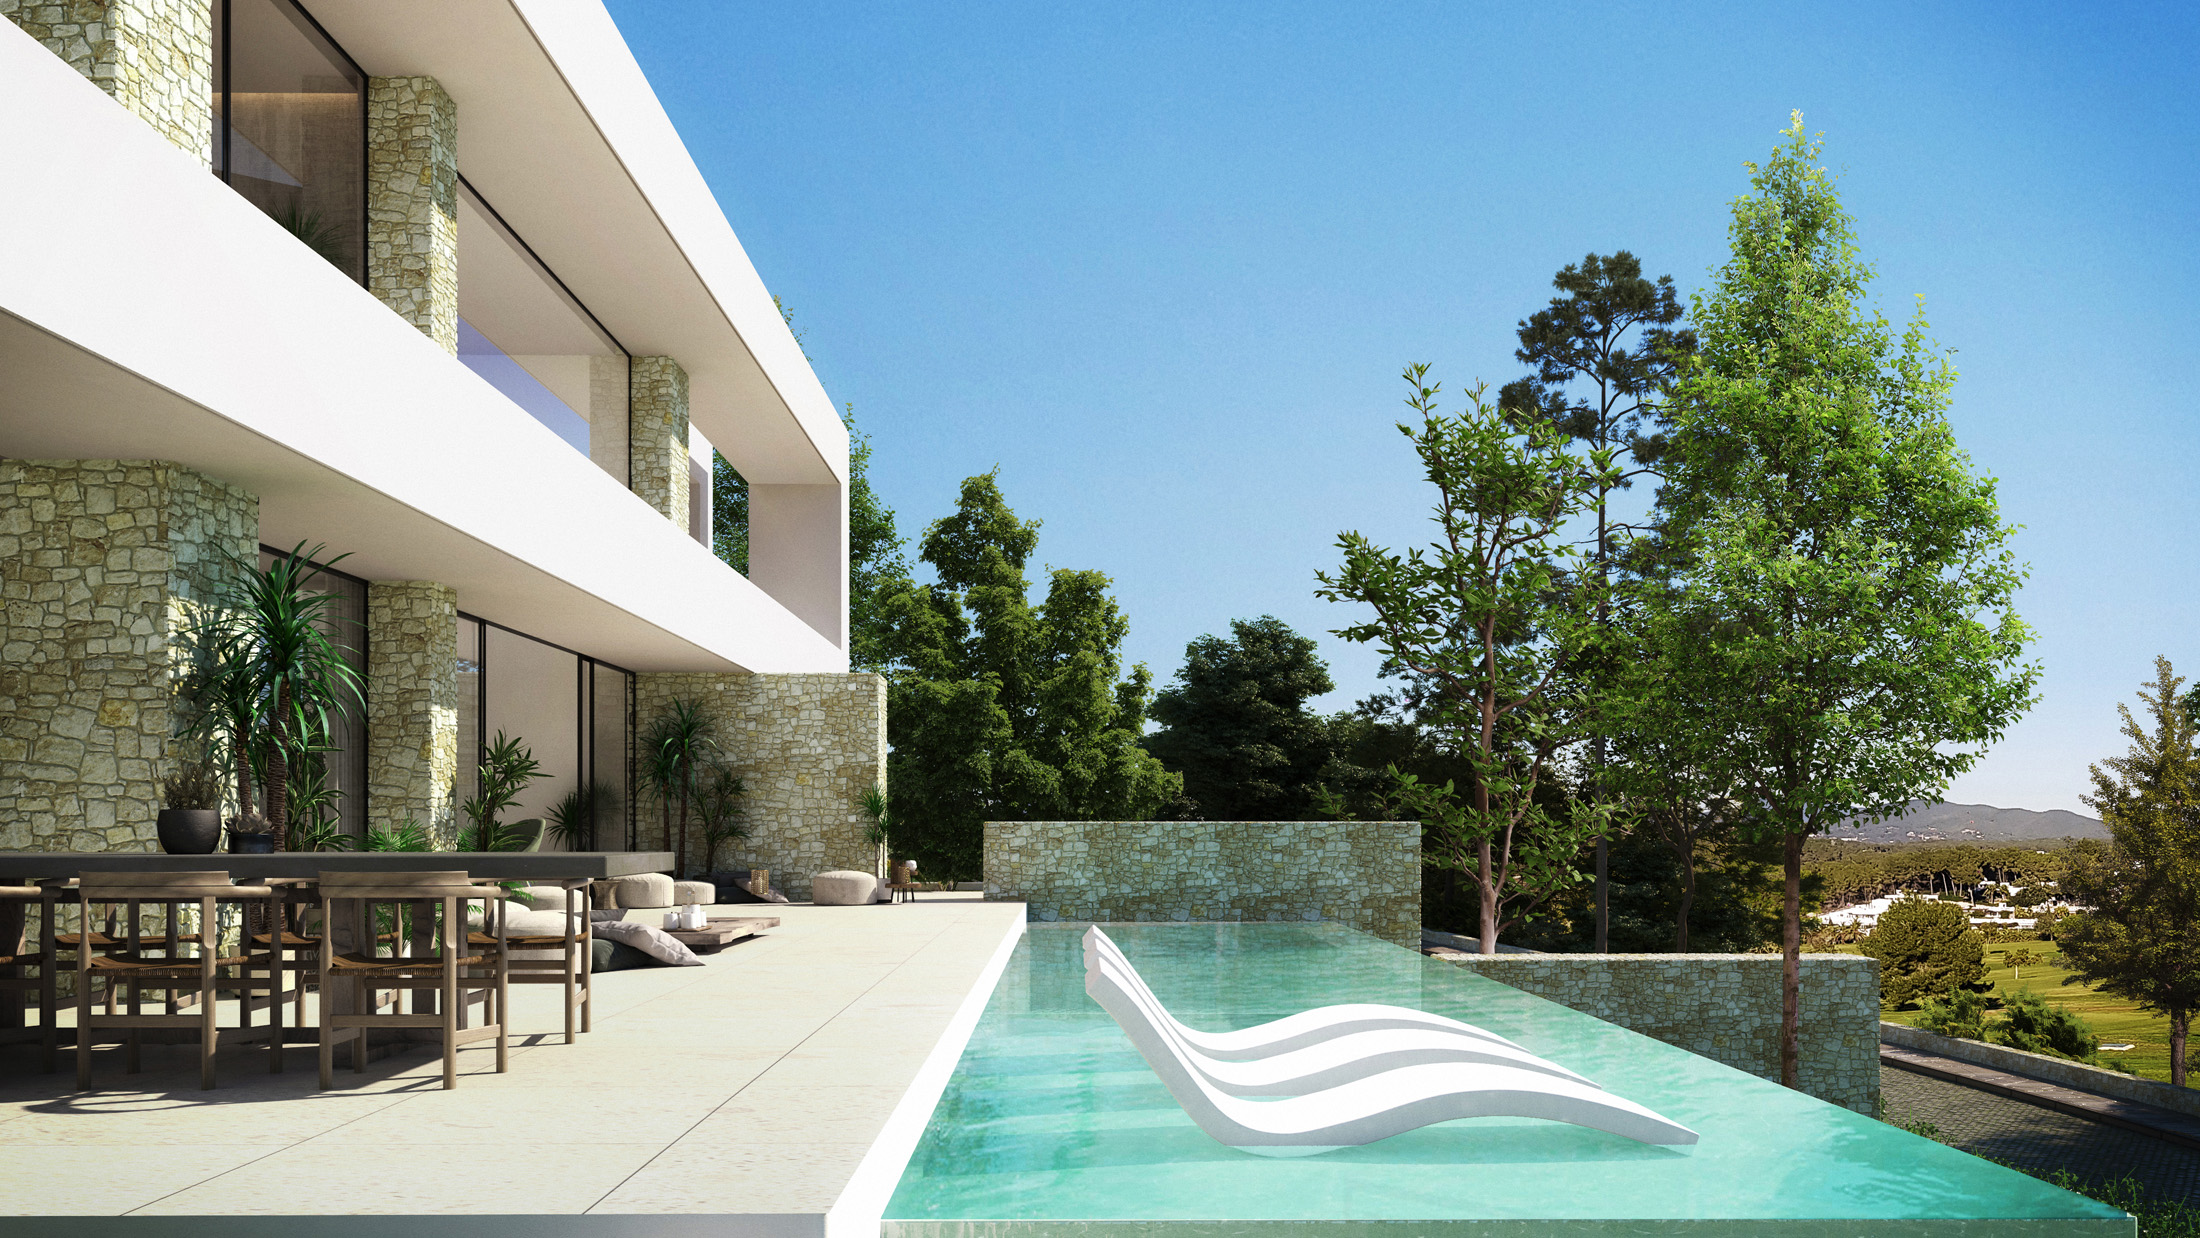 Sunbeds appear to float on the surface of a pool in a render of a luxury villa in Ibiza